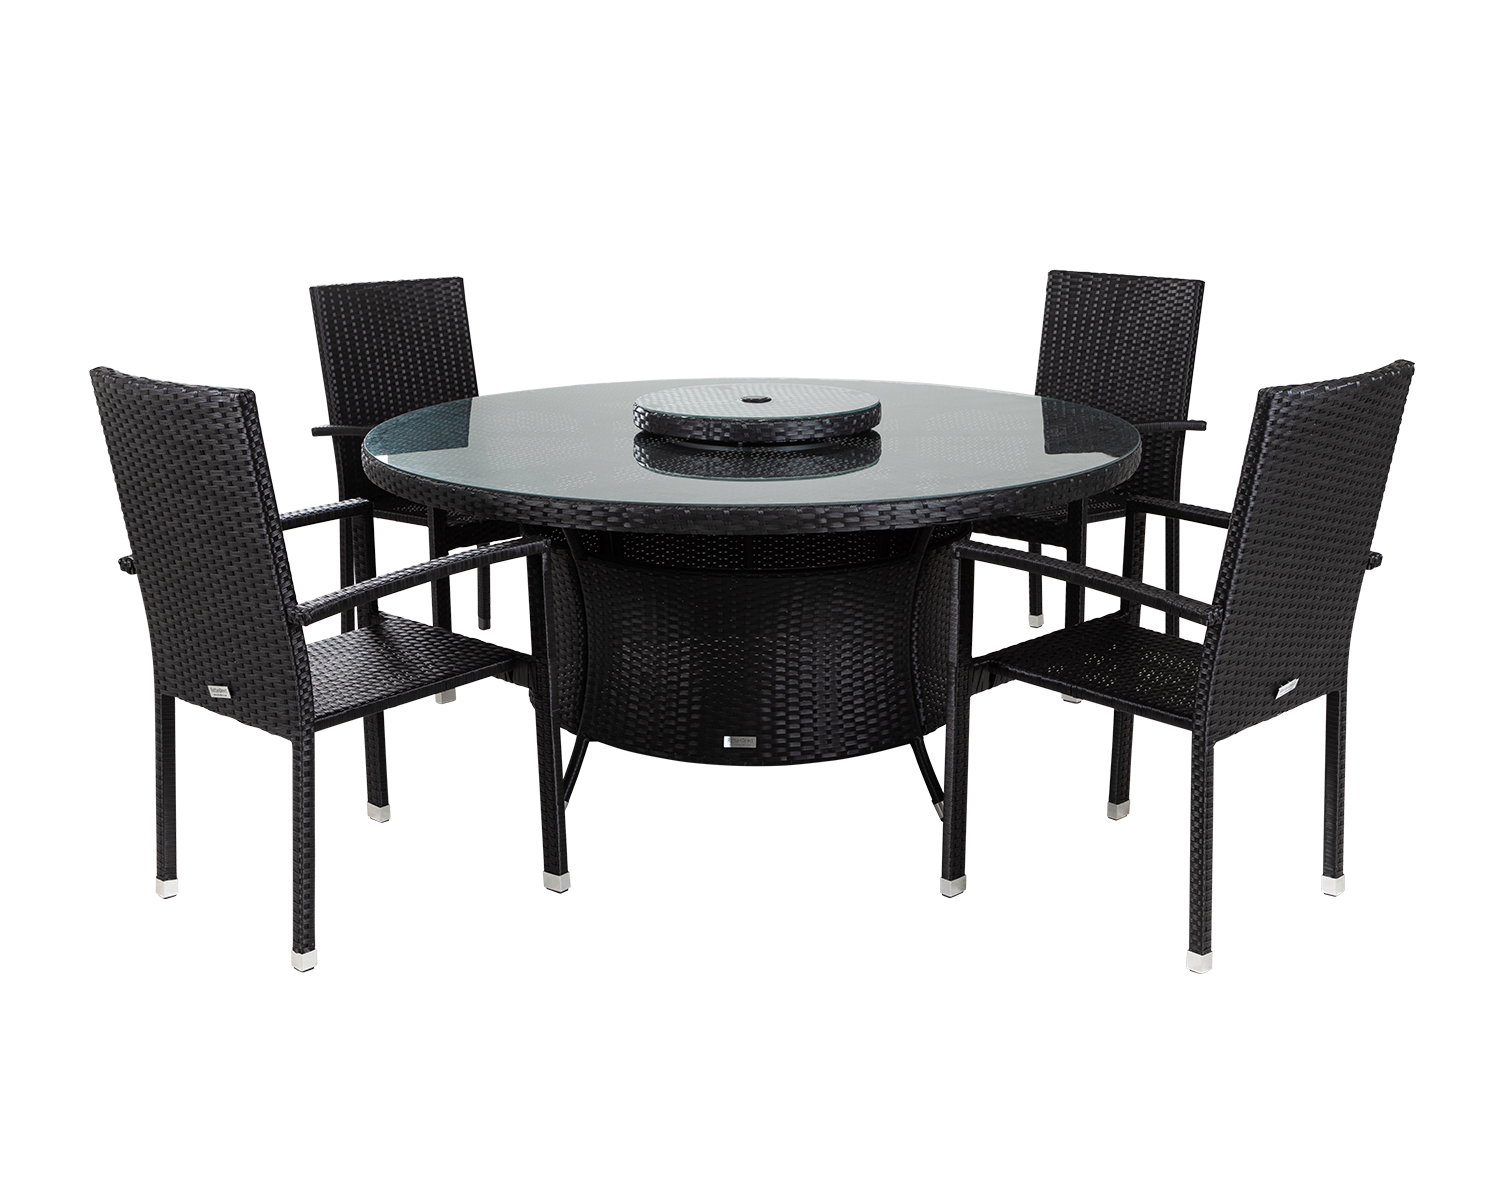 4 Seat Rattan Garden Dining Set With Large Round Dining Table In Black Rio Rattan Direct